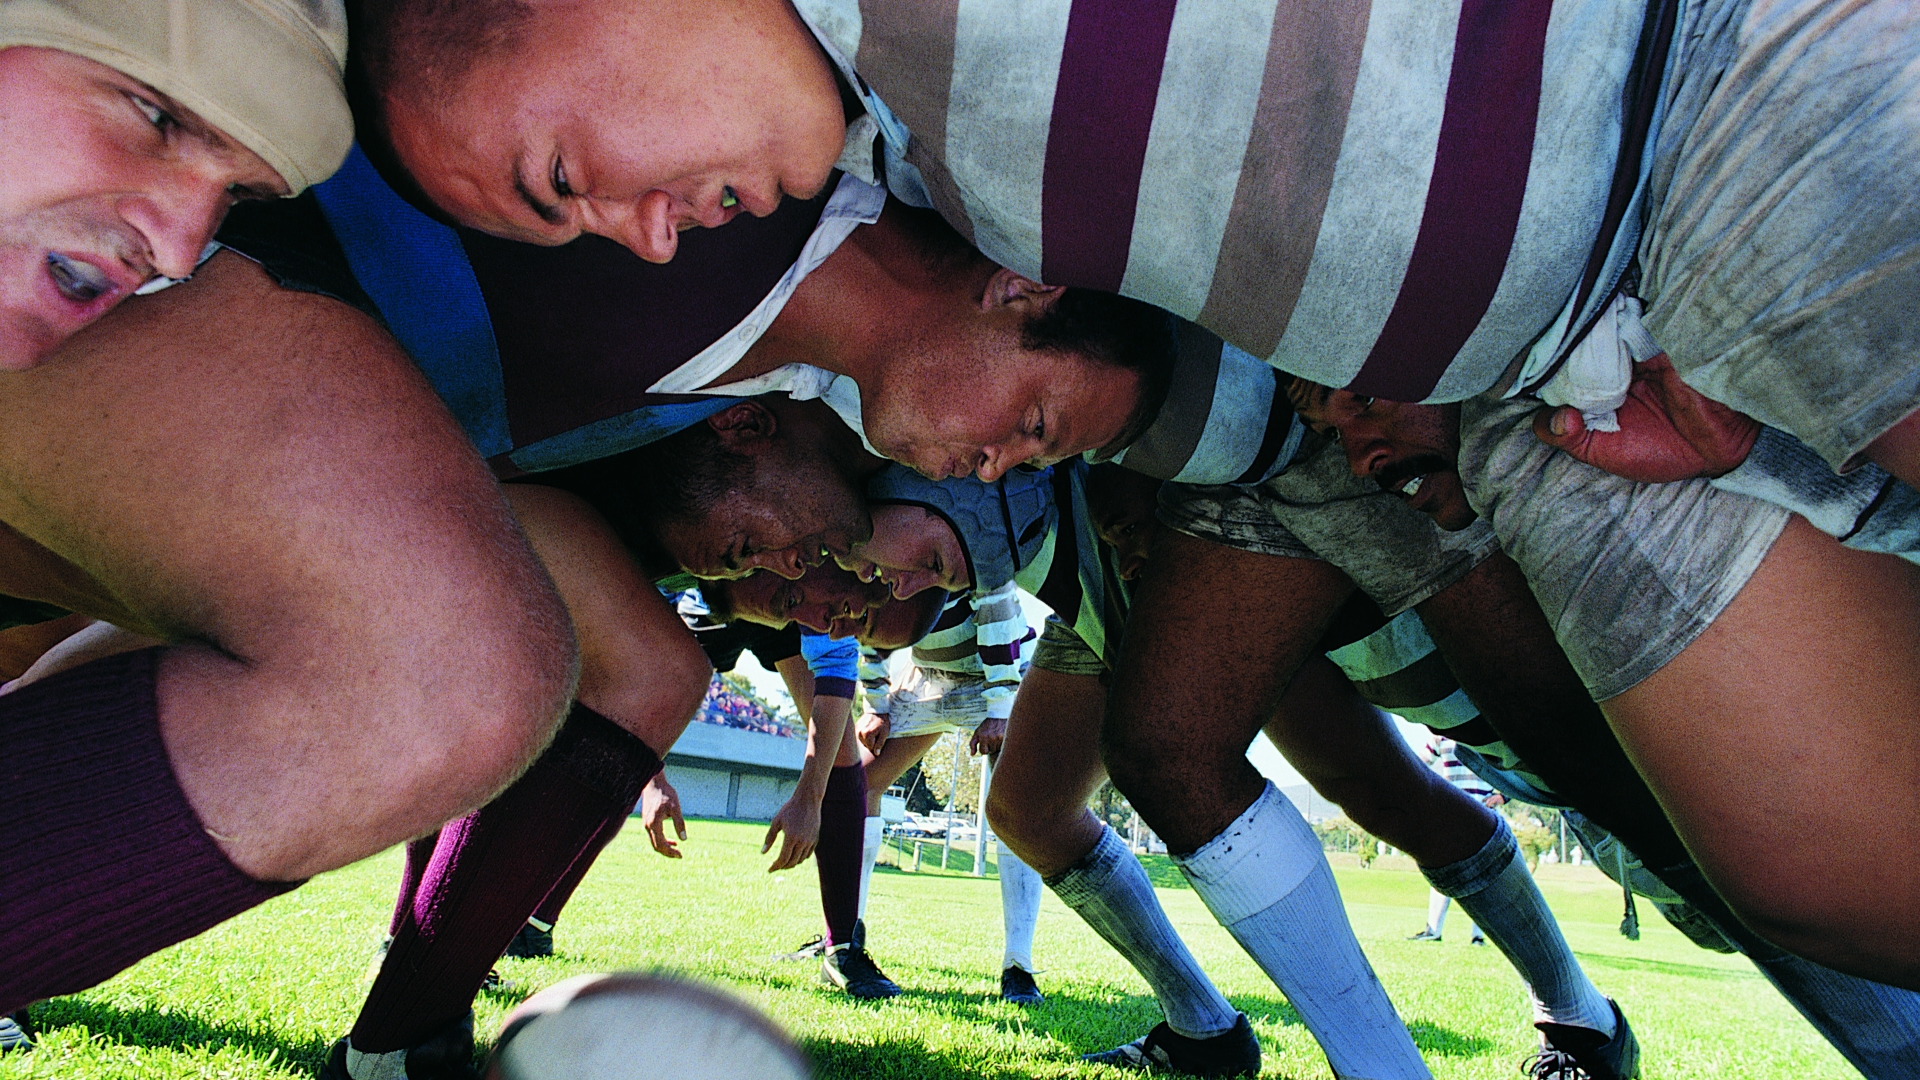 Researchers say rugby players are twice as likely to develop dementia from blows to the head.